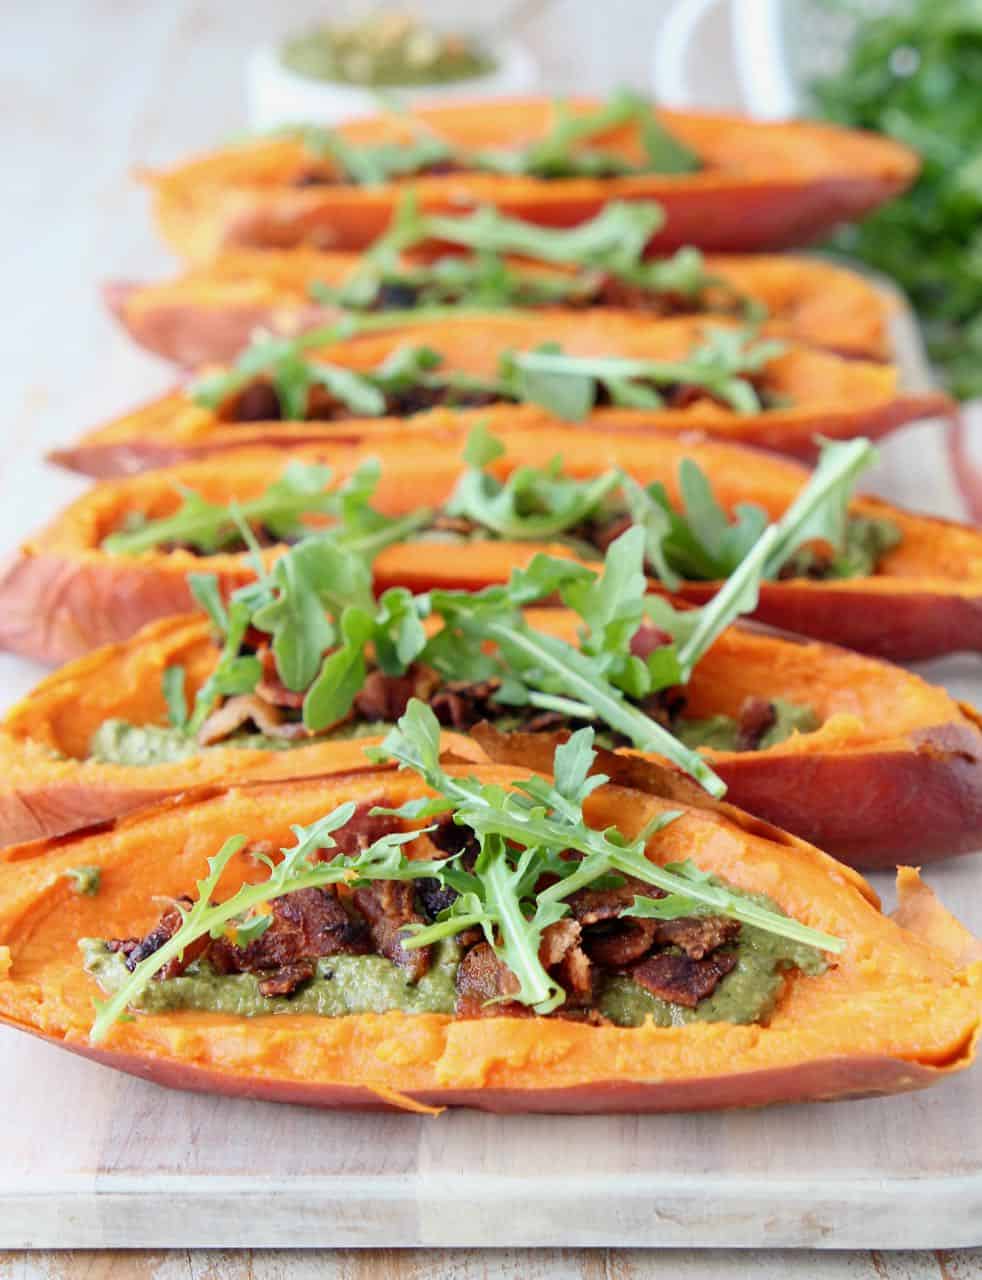 Loaded sweet potato skins on wood serving tray